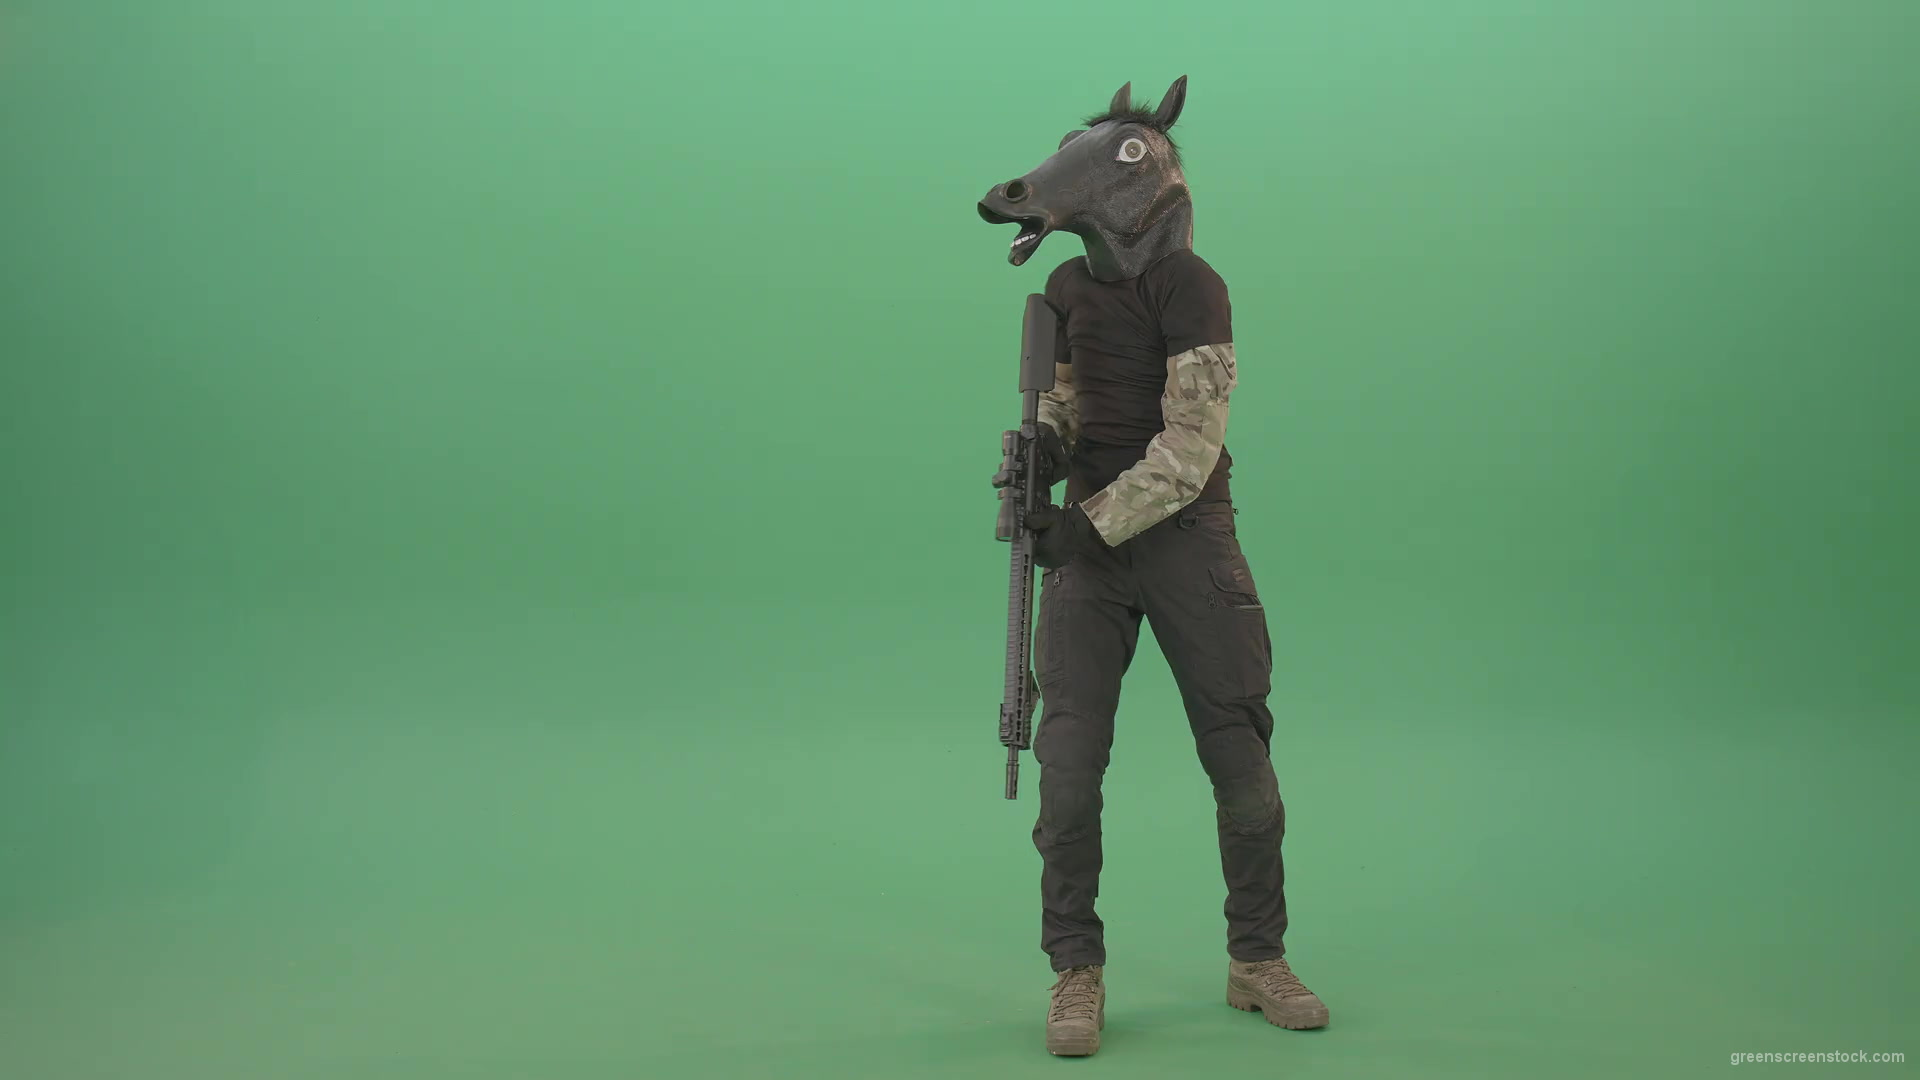 Front-view-Army-Man-in-horse-mask-shooting-from-Machine-Gun-isolated-on-Chromakey-Green-Screen-4K-Video-Footage-1920_001 Green Screen Stock